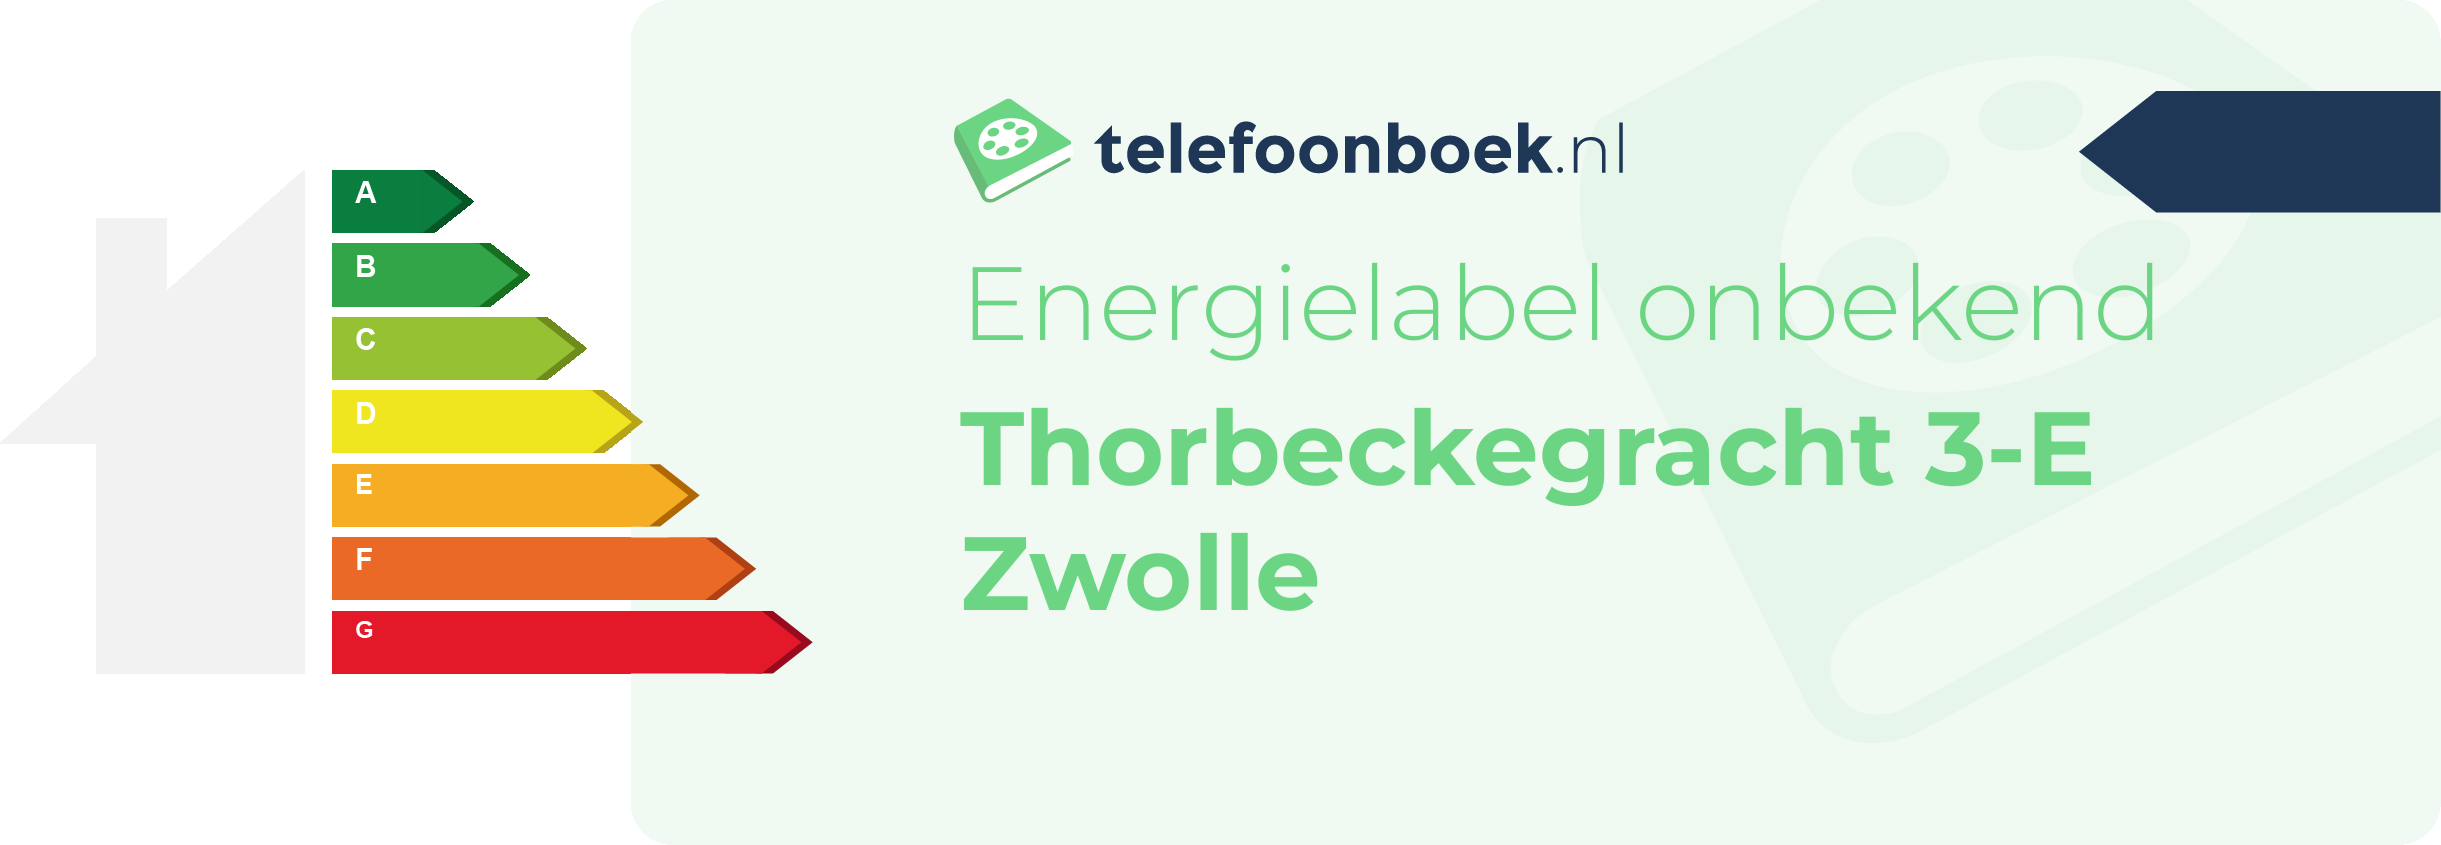 Energielabel Thorbeckegracht 3-E Zwolle